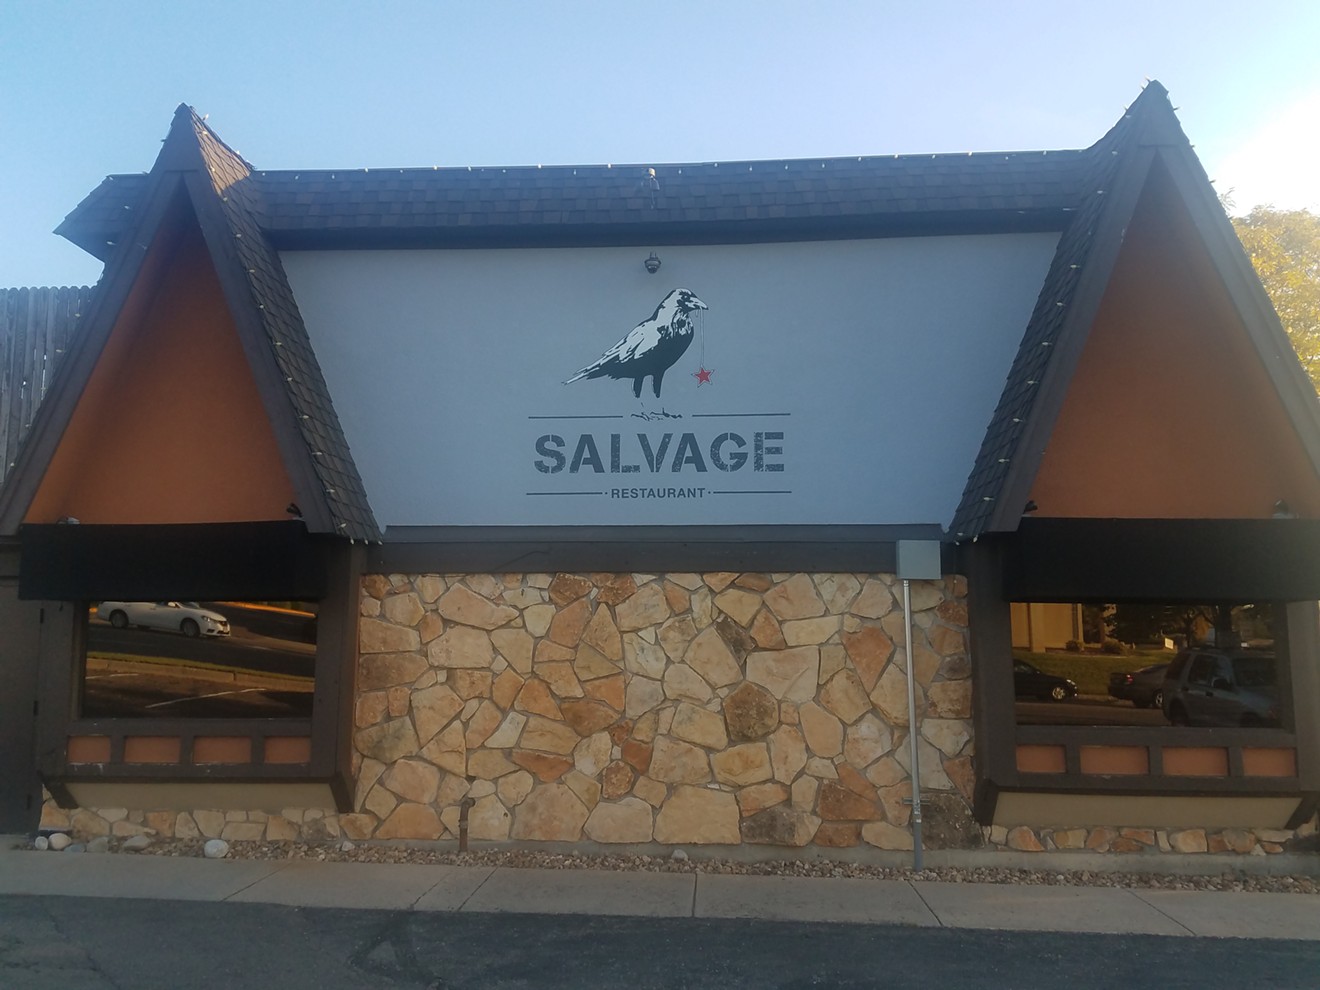 The new Salvage sign in place of the old Summit name.